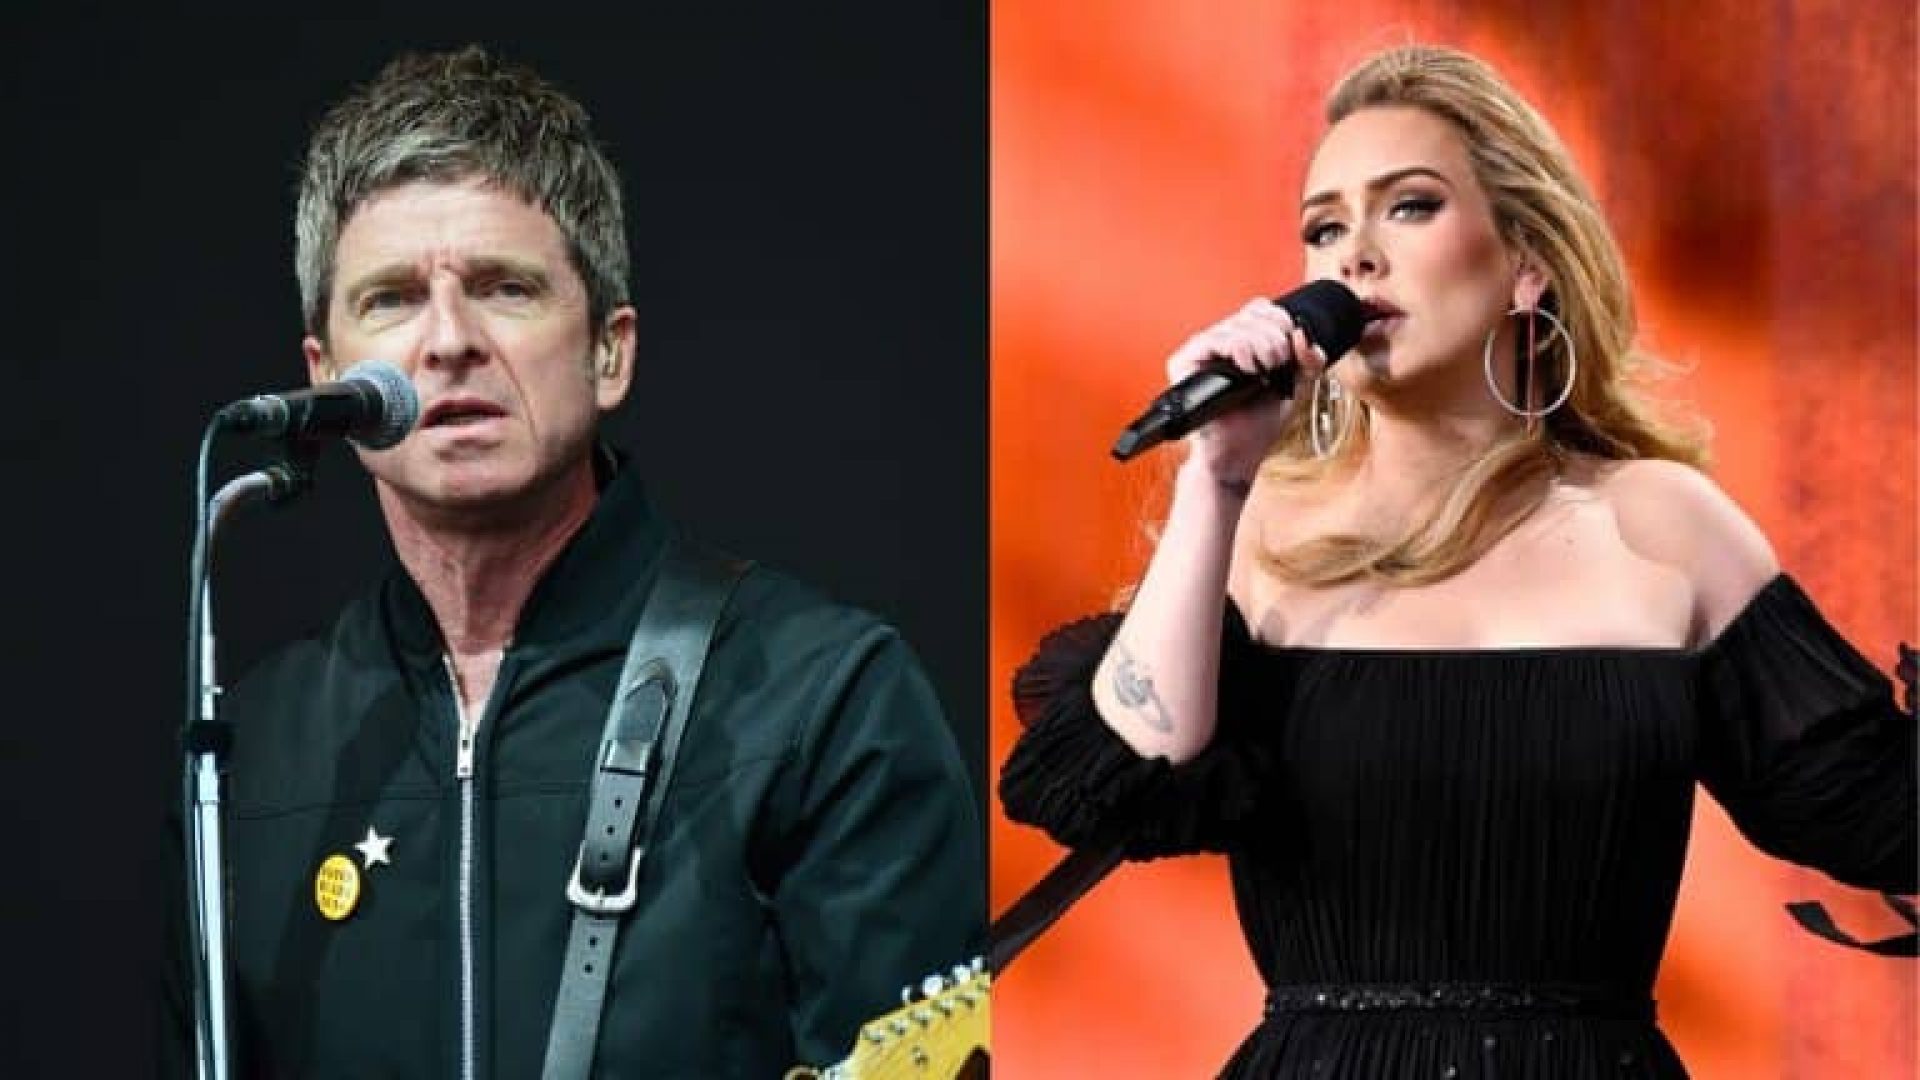 Noel Gallagher opens up about his feud with Adele